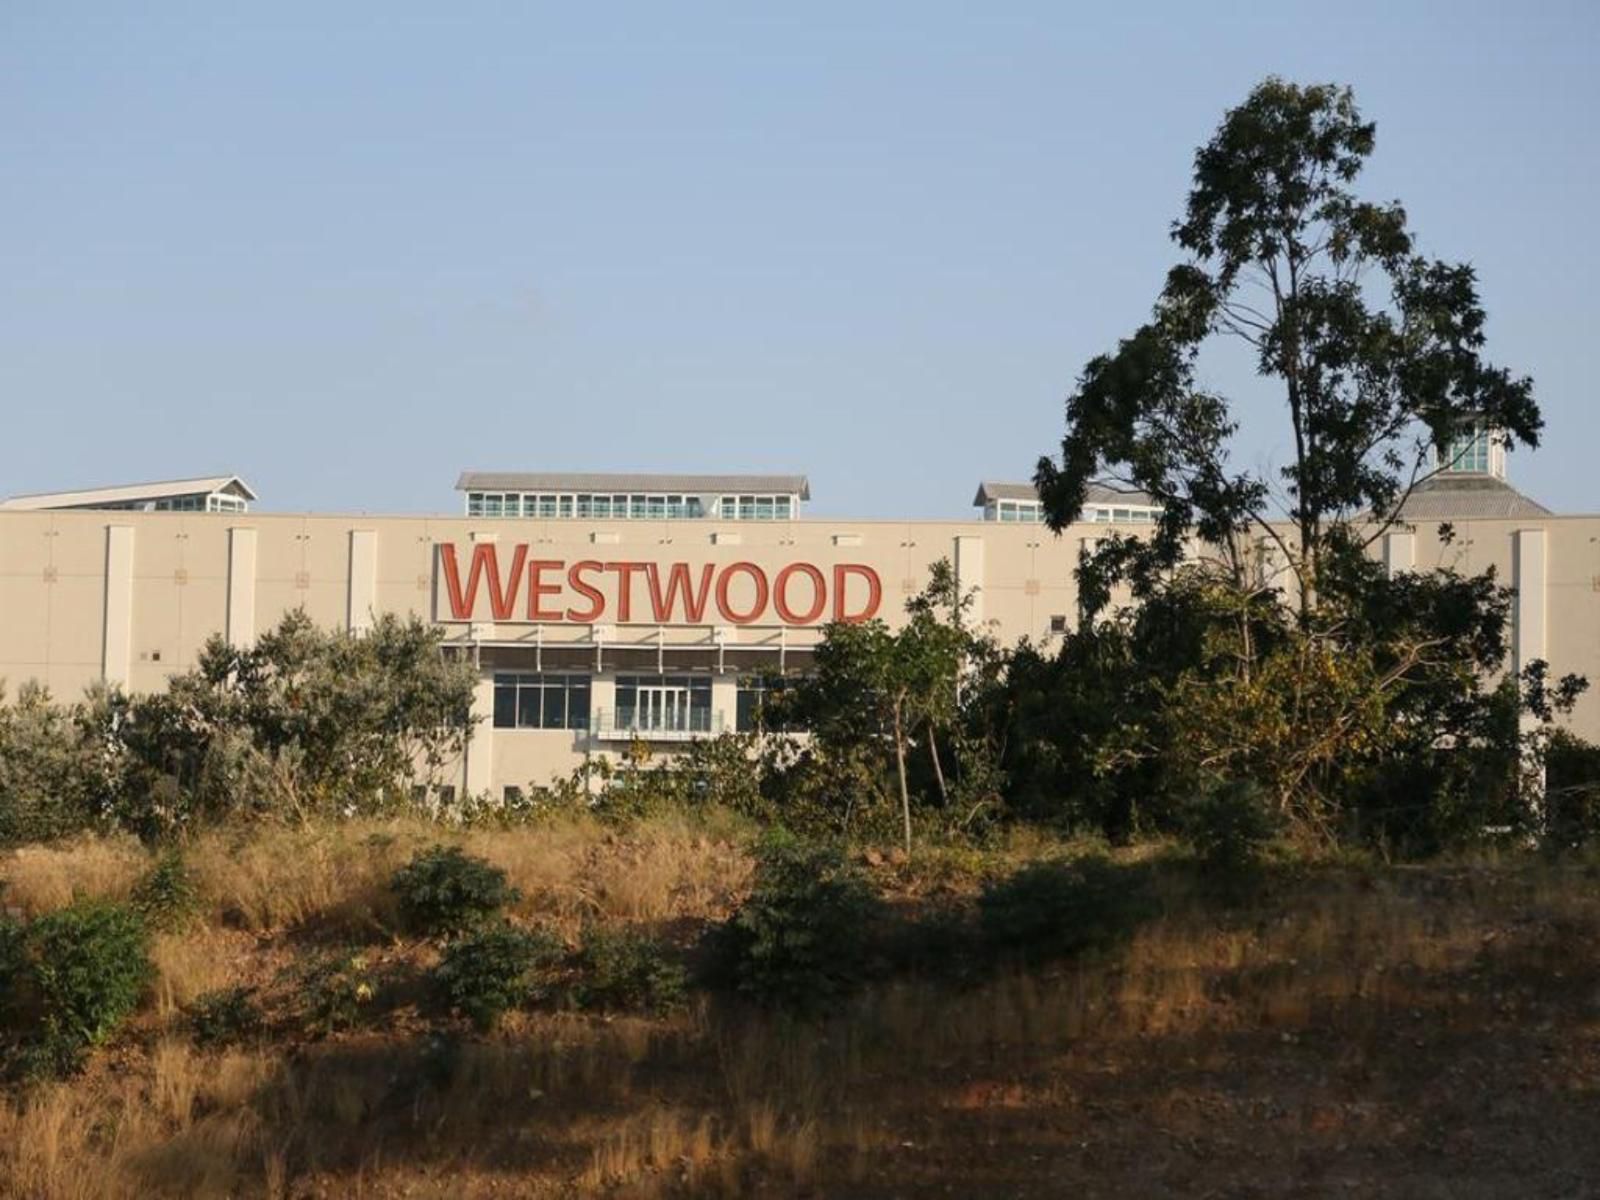 Westwood Skye Westville Durban Kwazulu Natal South Africa Complementary Colors, Forest, Nature, Plant, Tree, Wood, Hollywood Sign, Sight, Architecture, Sign, Text, Travel